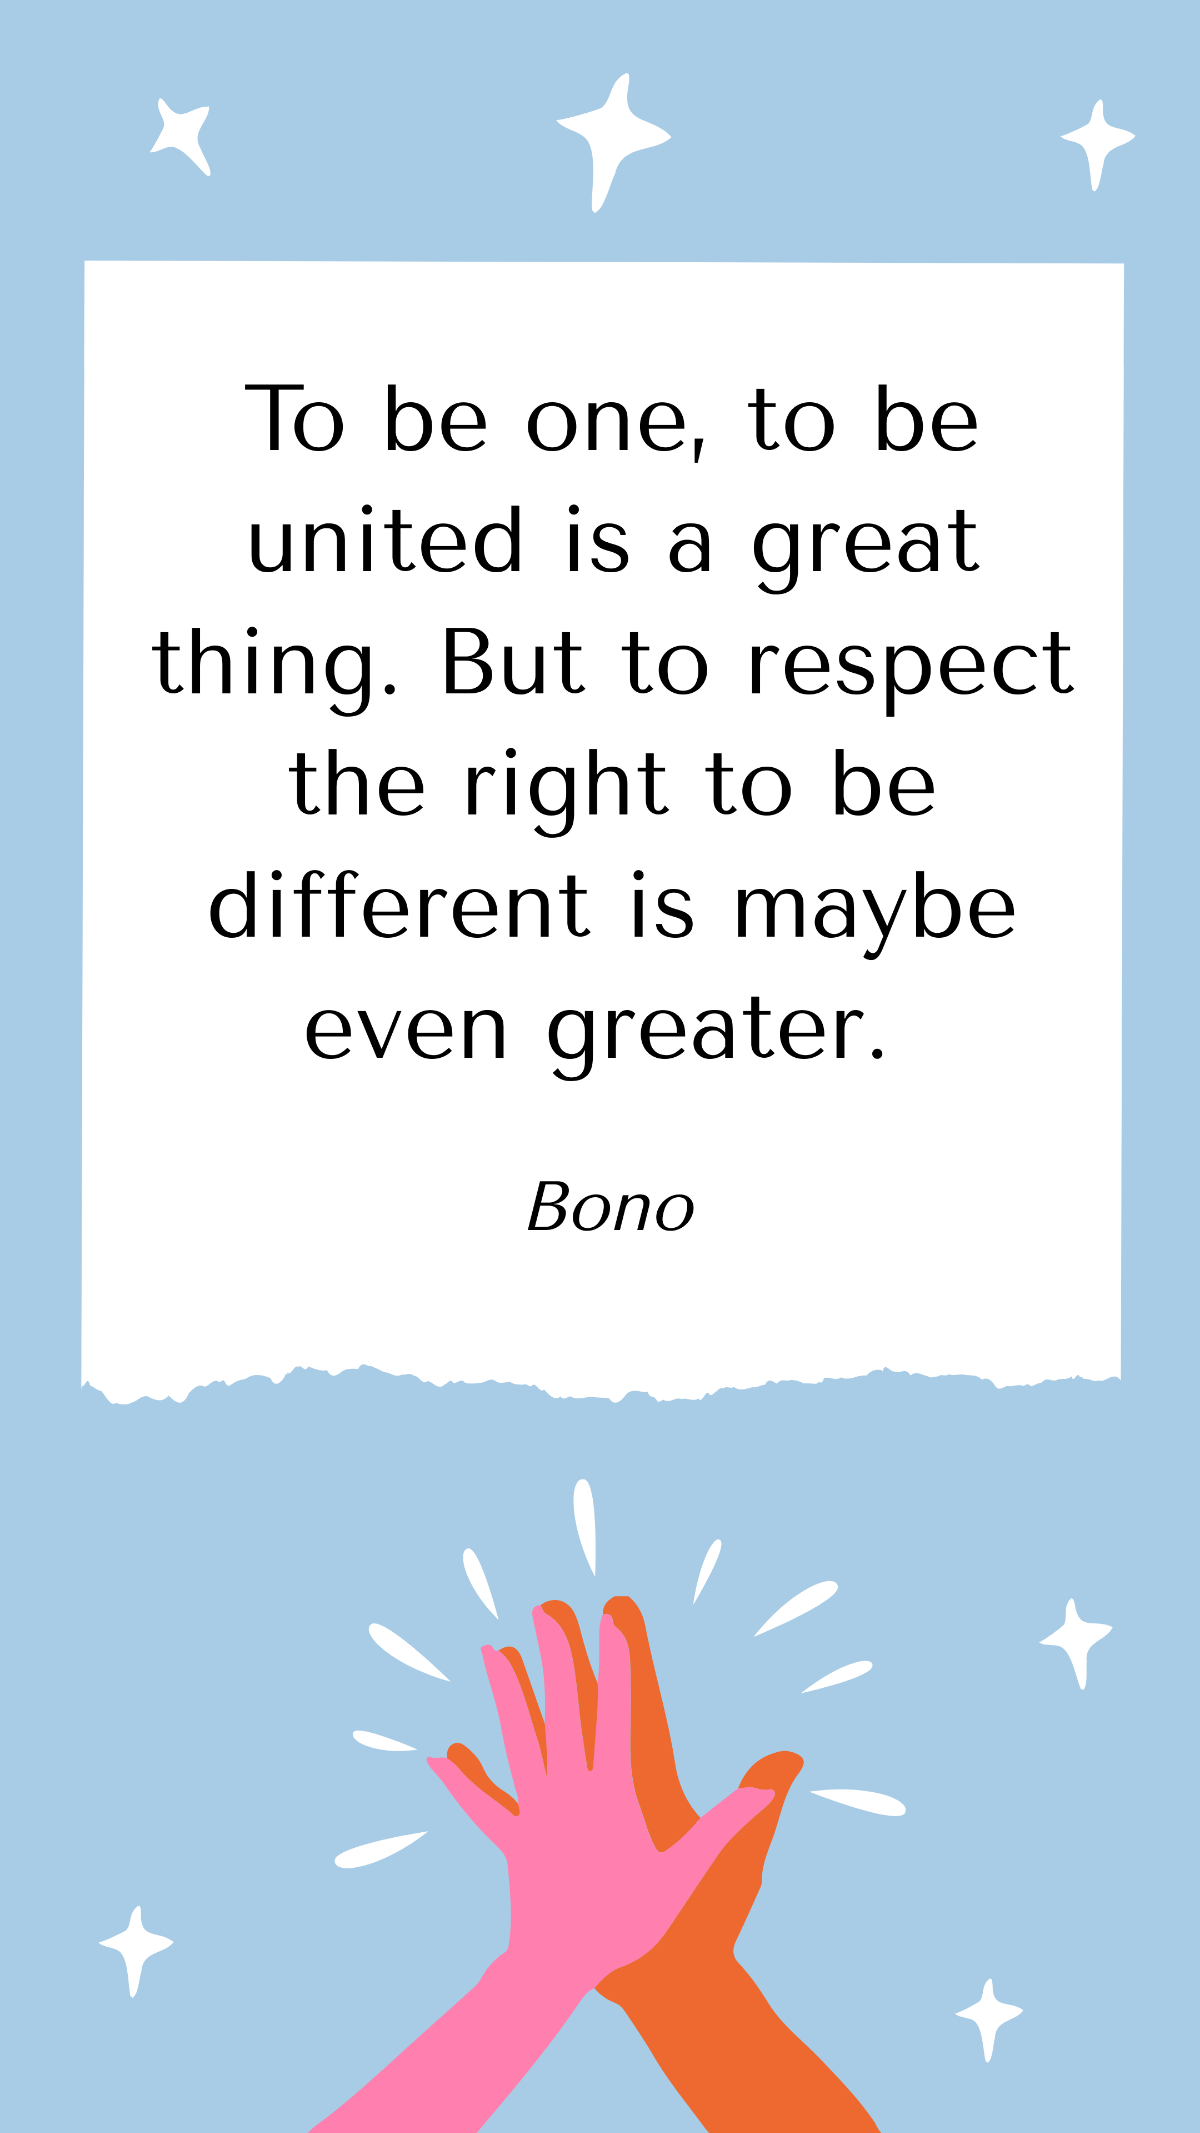 Bono - To be one, to be united is a great thing. But to respect the right to be different is maybe even greater. Template